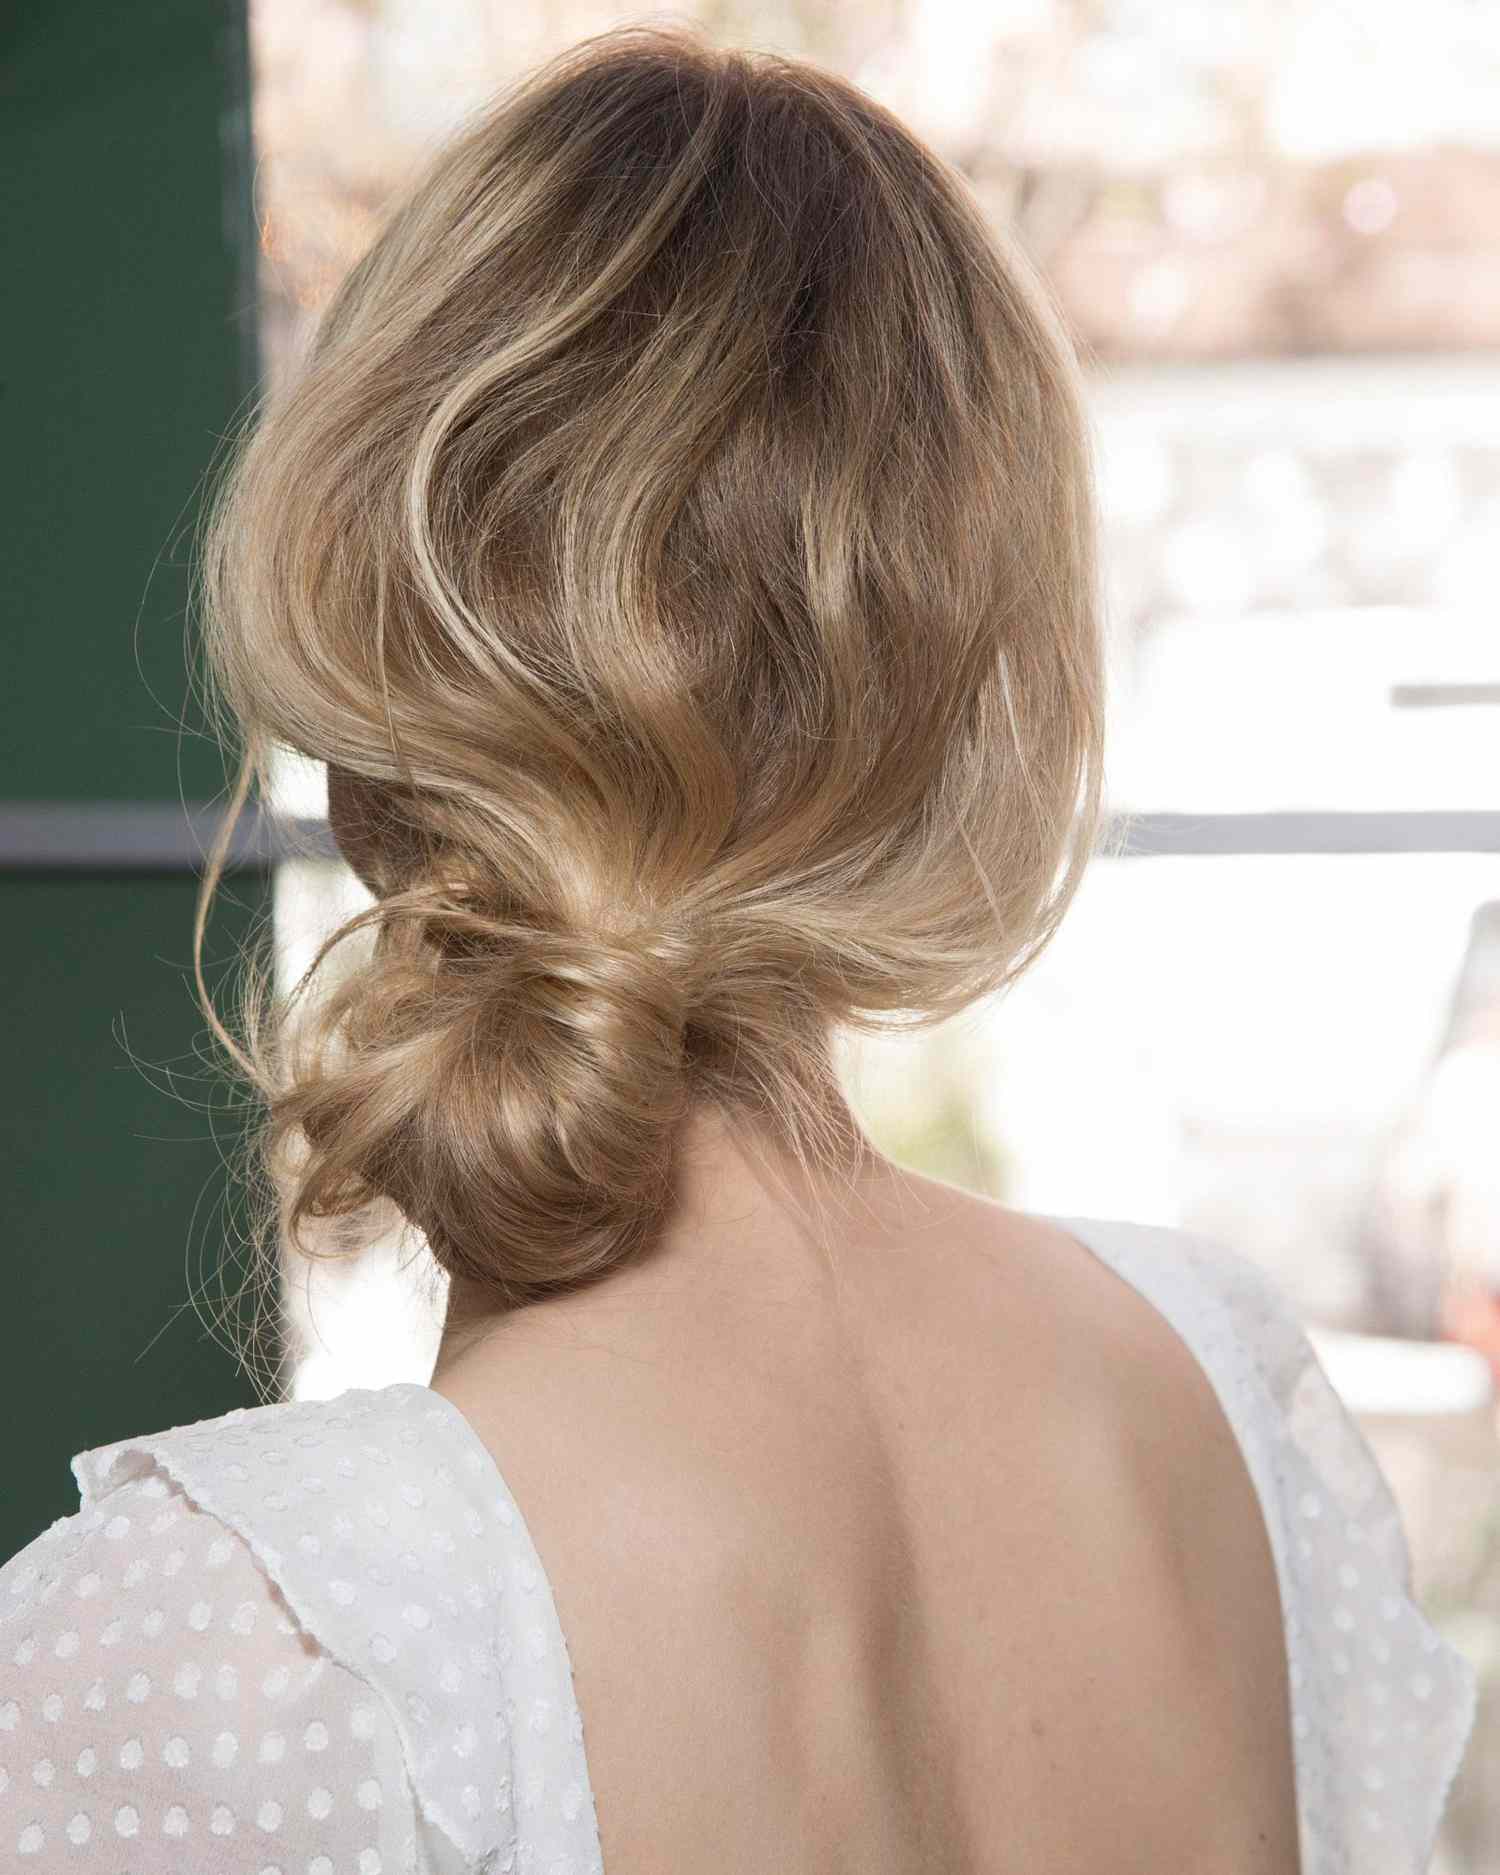 Textured Messy Bun How-To